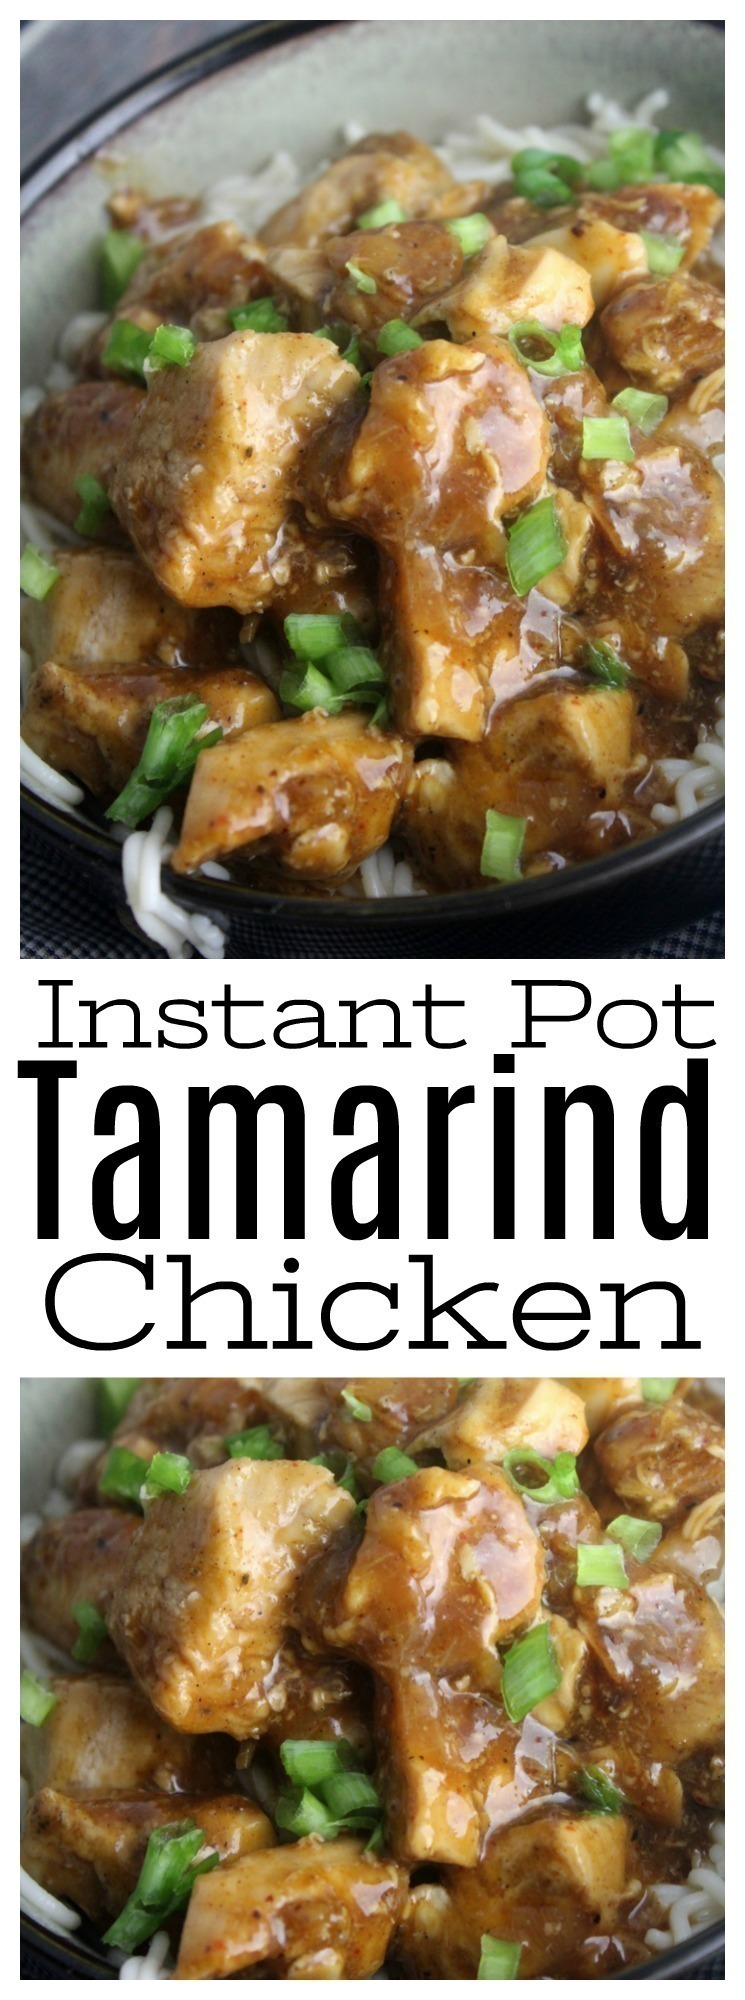 An incredibly easy, delicious recipe for Tamarind Chicken that will have your kids coming back for seconds!